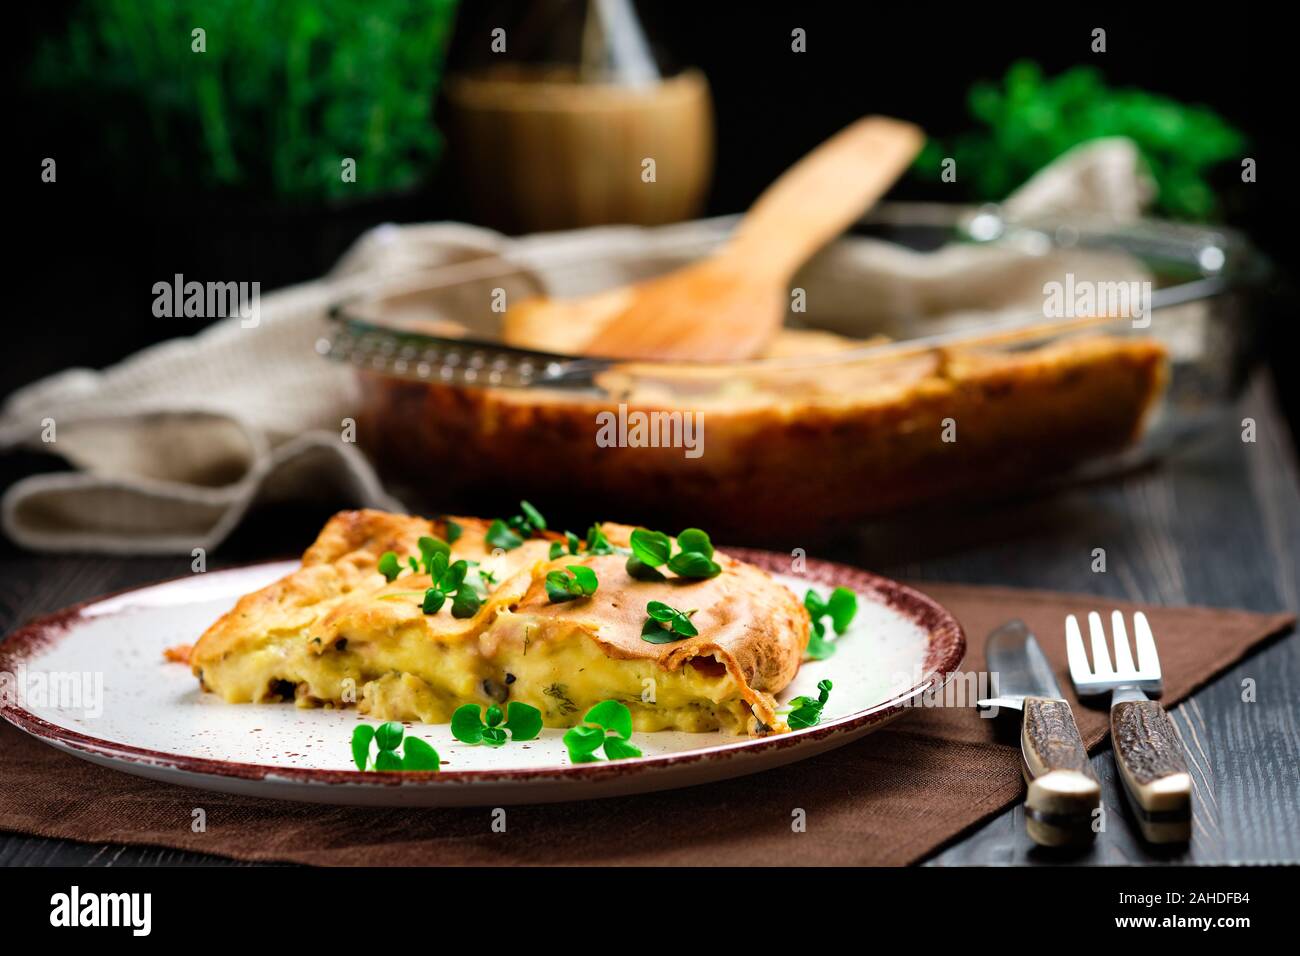 Mashed Potato Casserole baked in oven Stock Photo